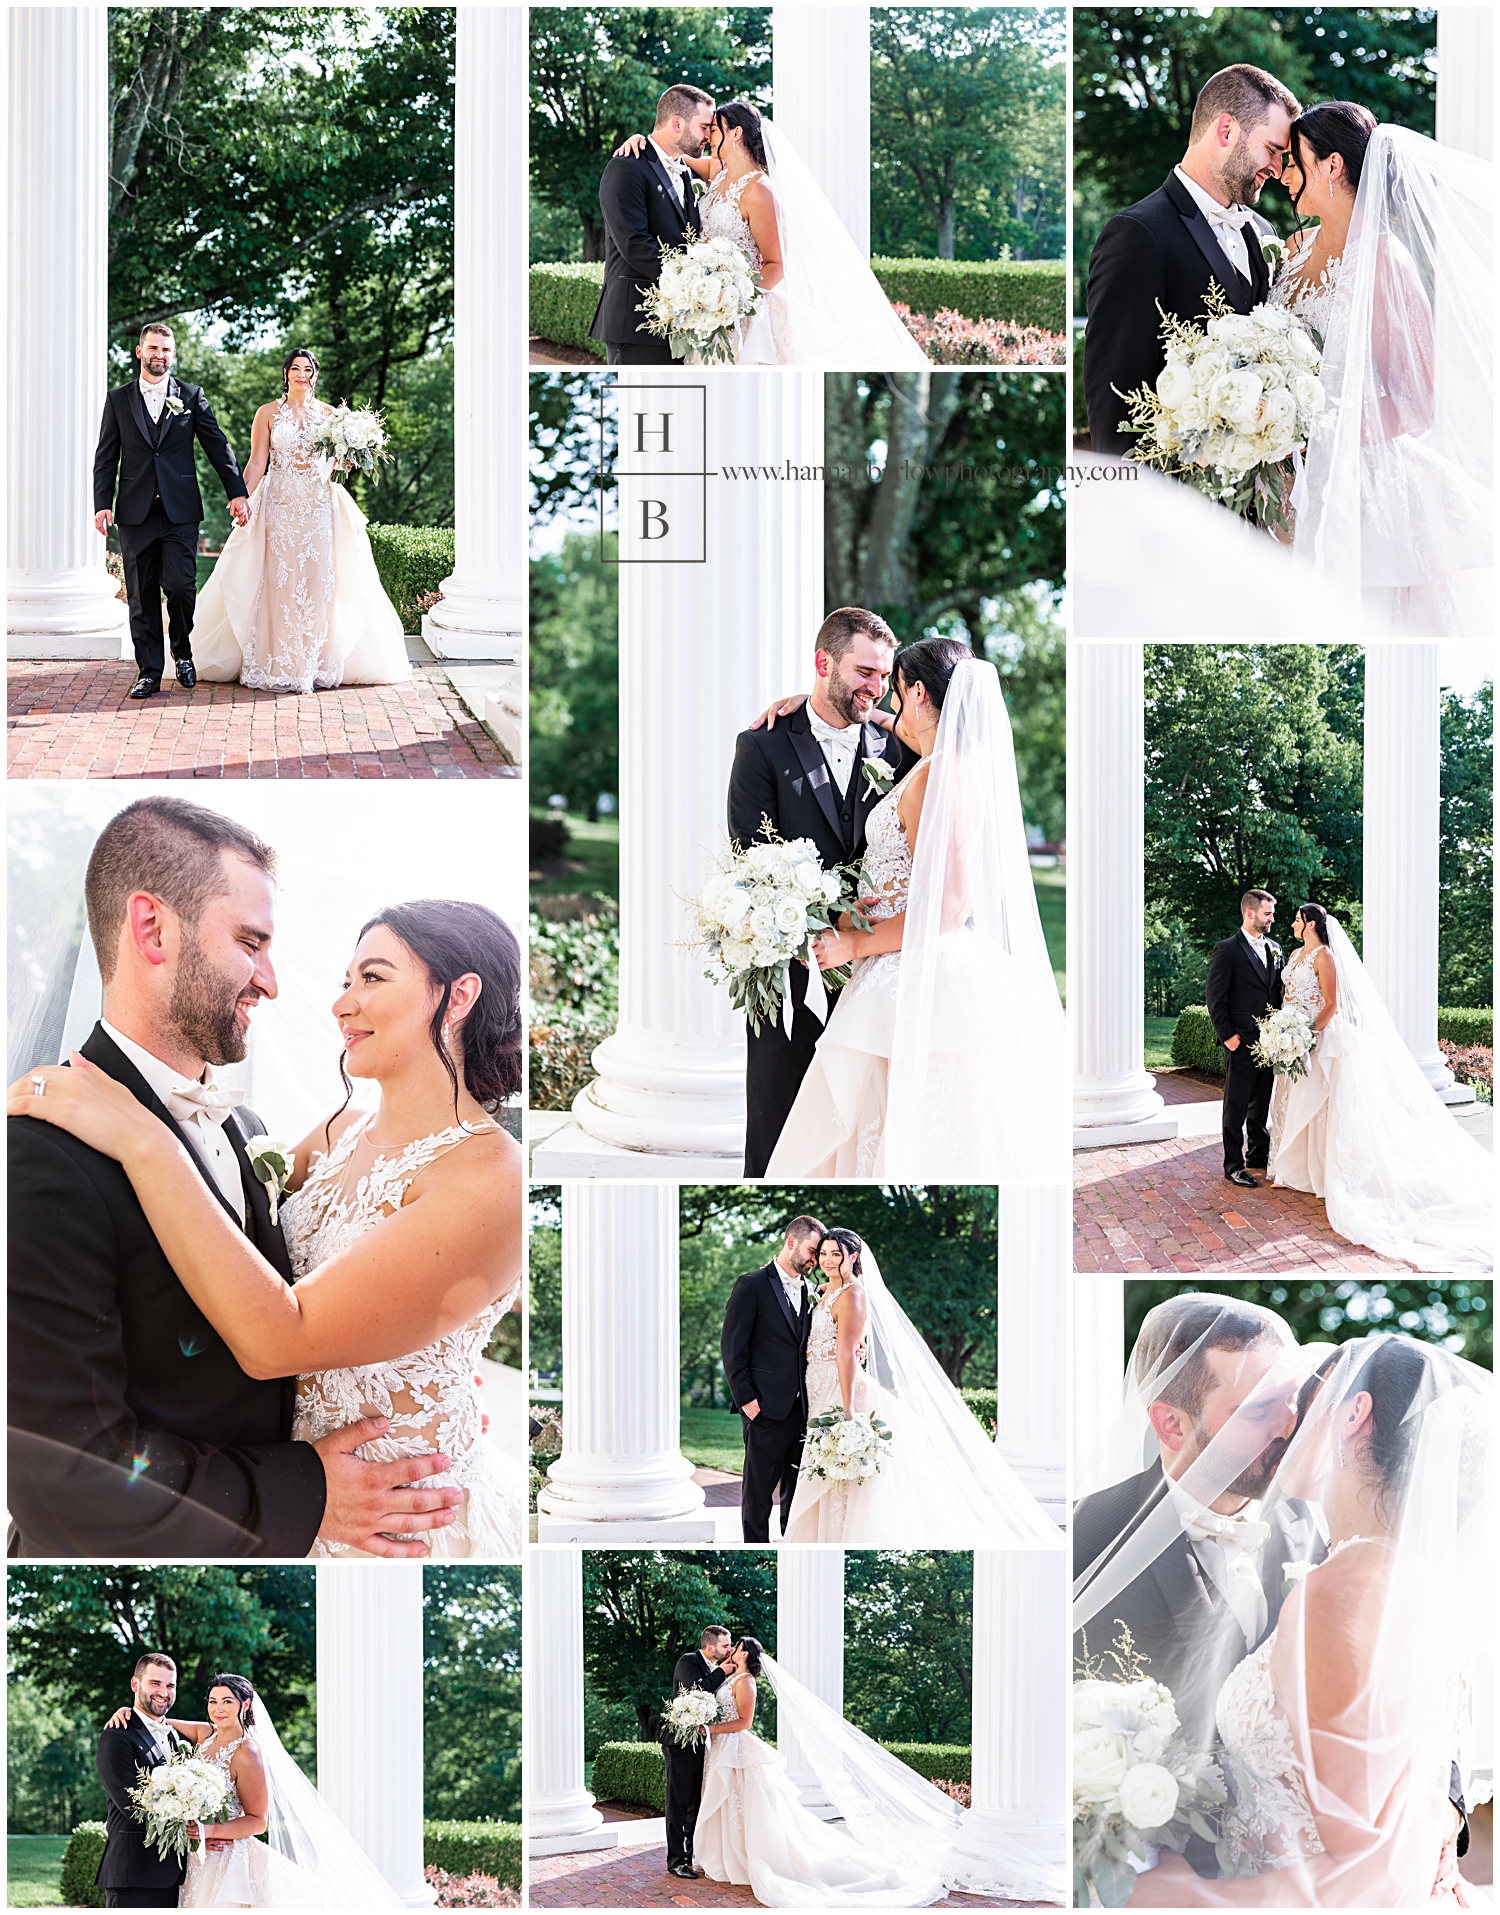 Collage of bride and groom portraits on red brick porch with white pillars at Oglebay.